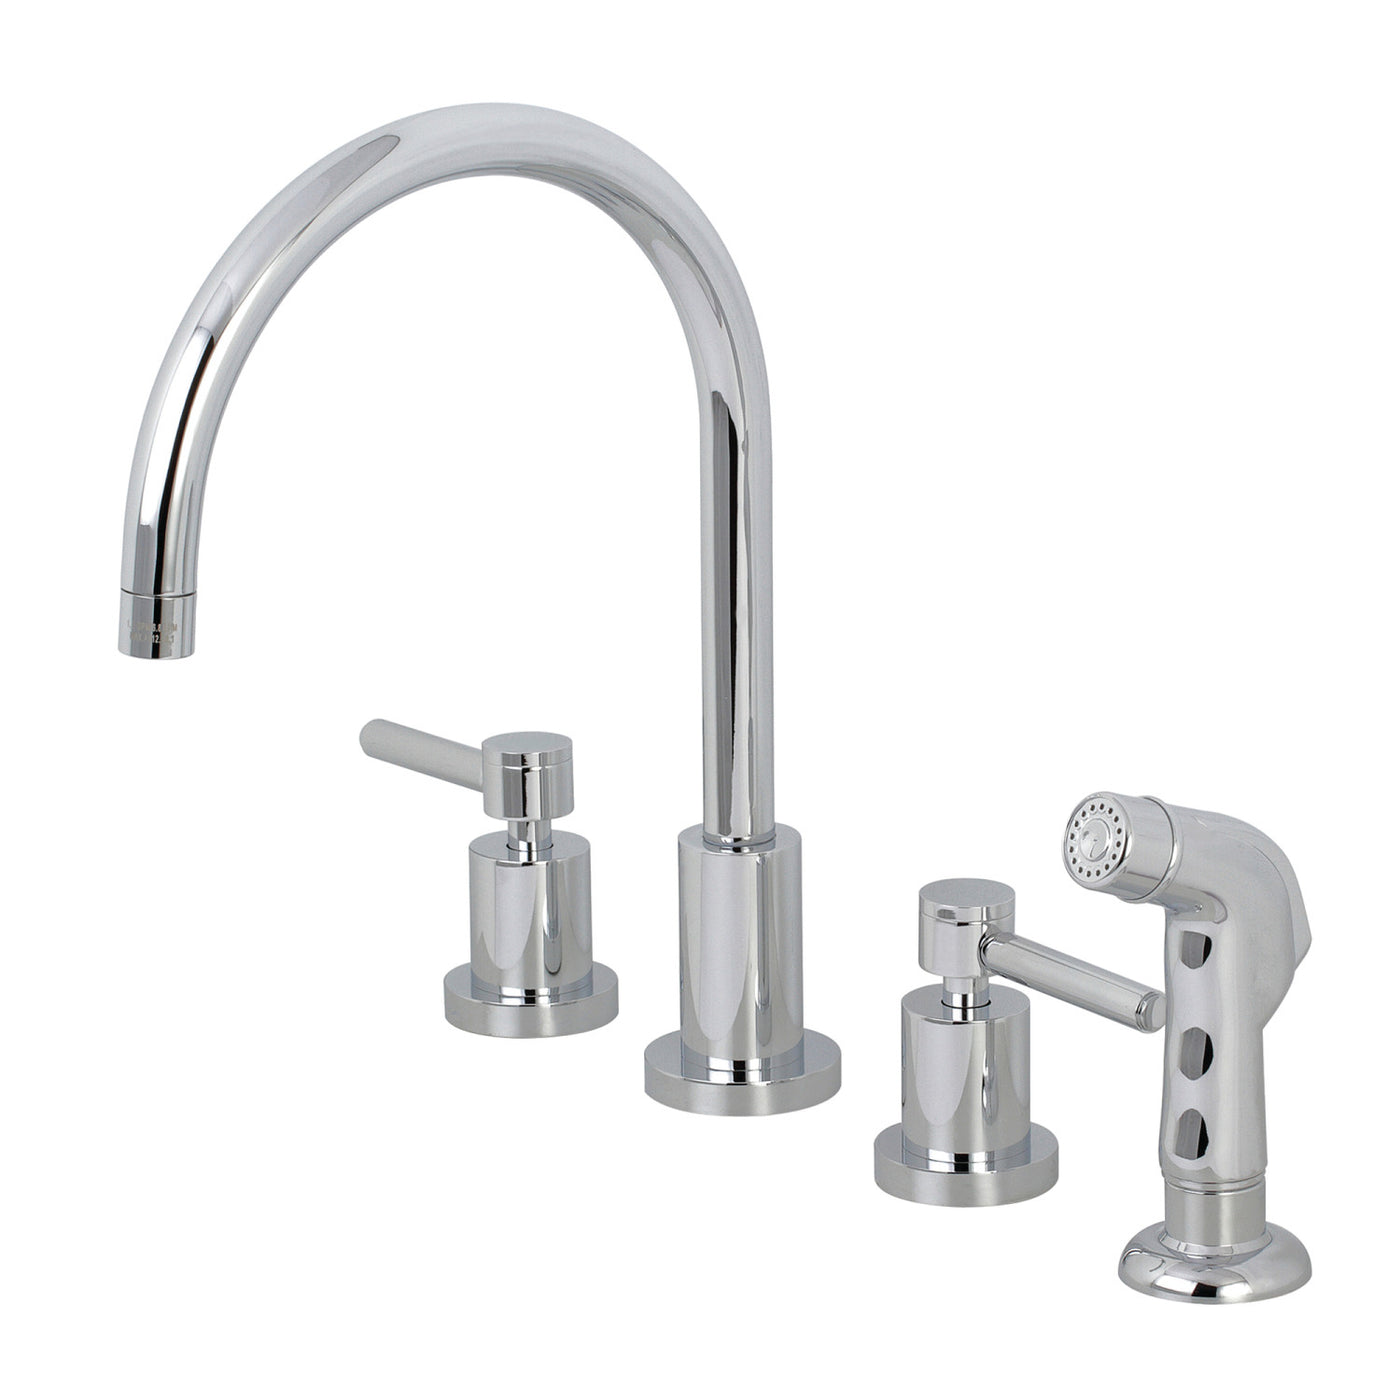 Elements of Design ES8721DL Widespread Kitchen Faucet with Plastic Sprayer, Polished Chrome